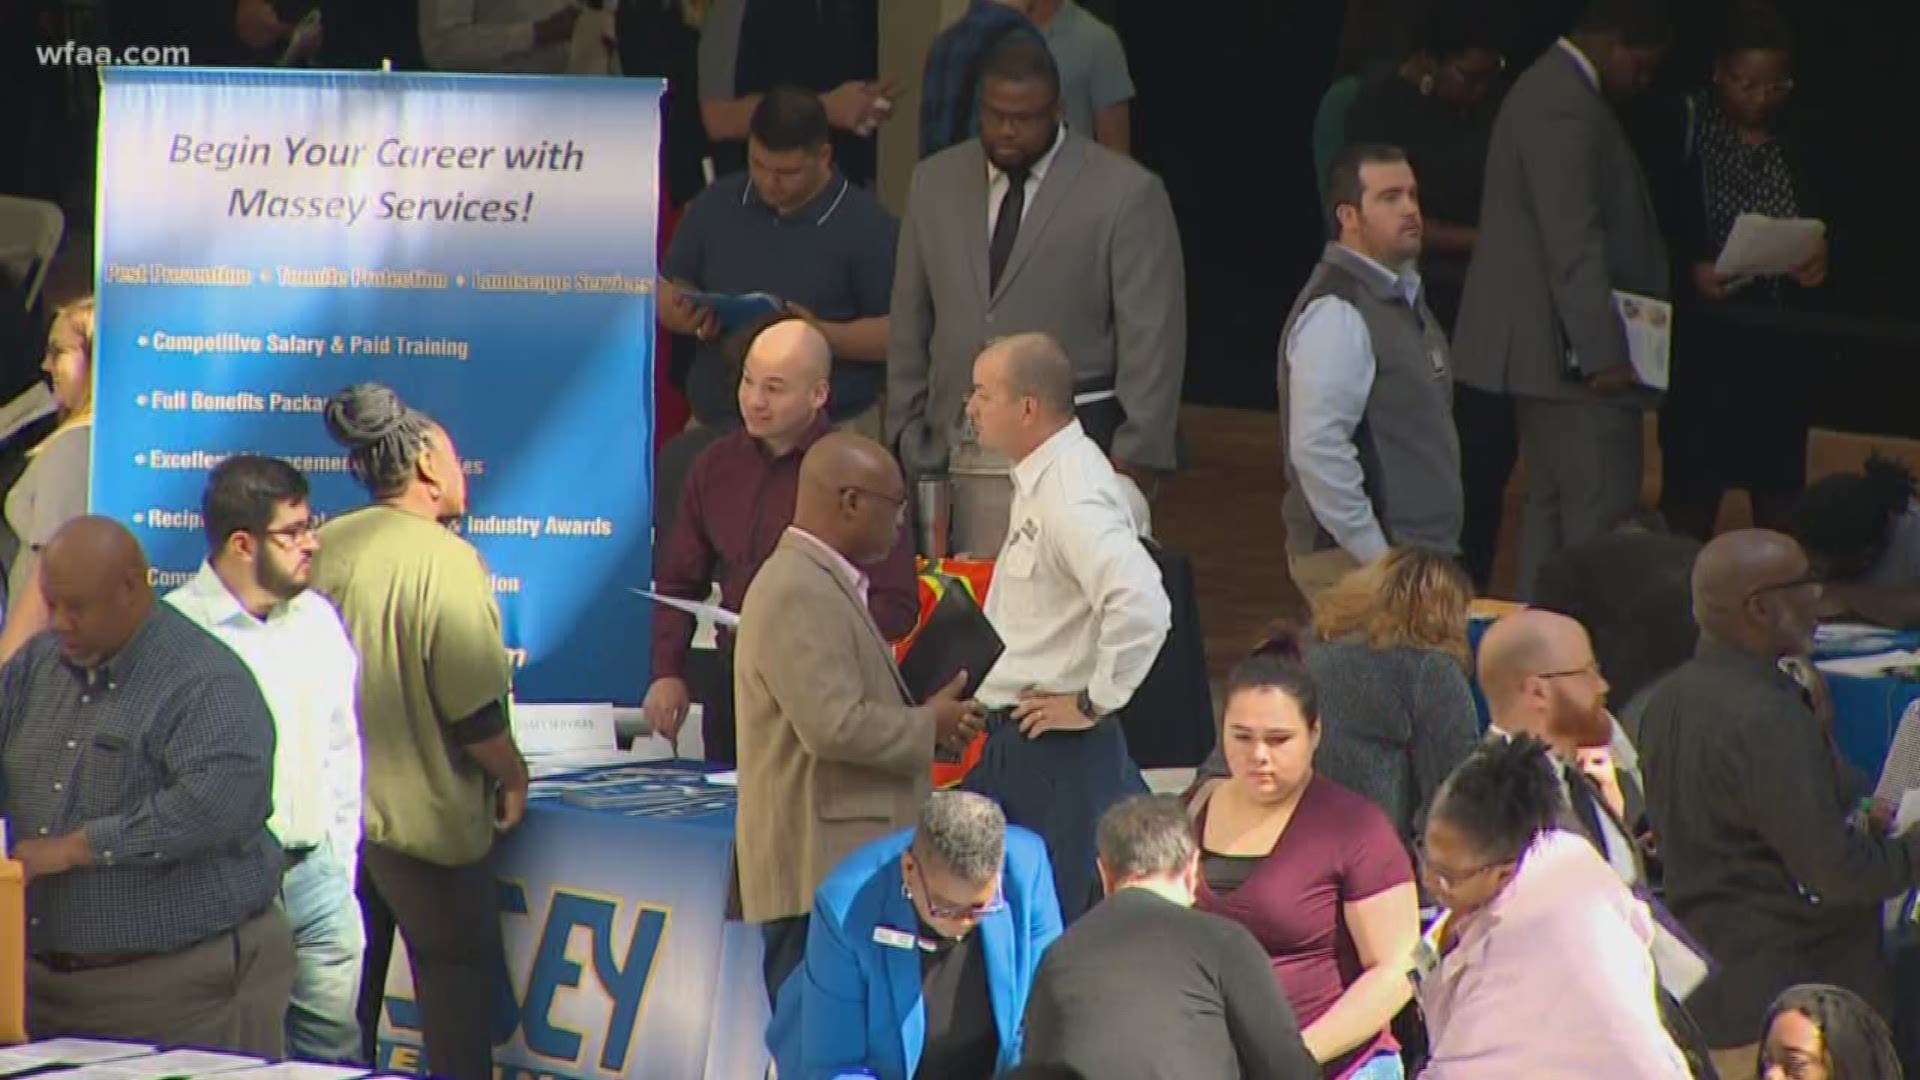 More than 30 employers gathered, offering entry-level and mid-level jobs during a unique job fair in Southern Dallas.